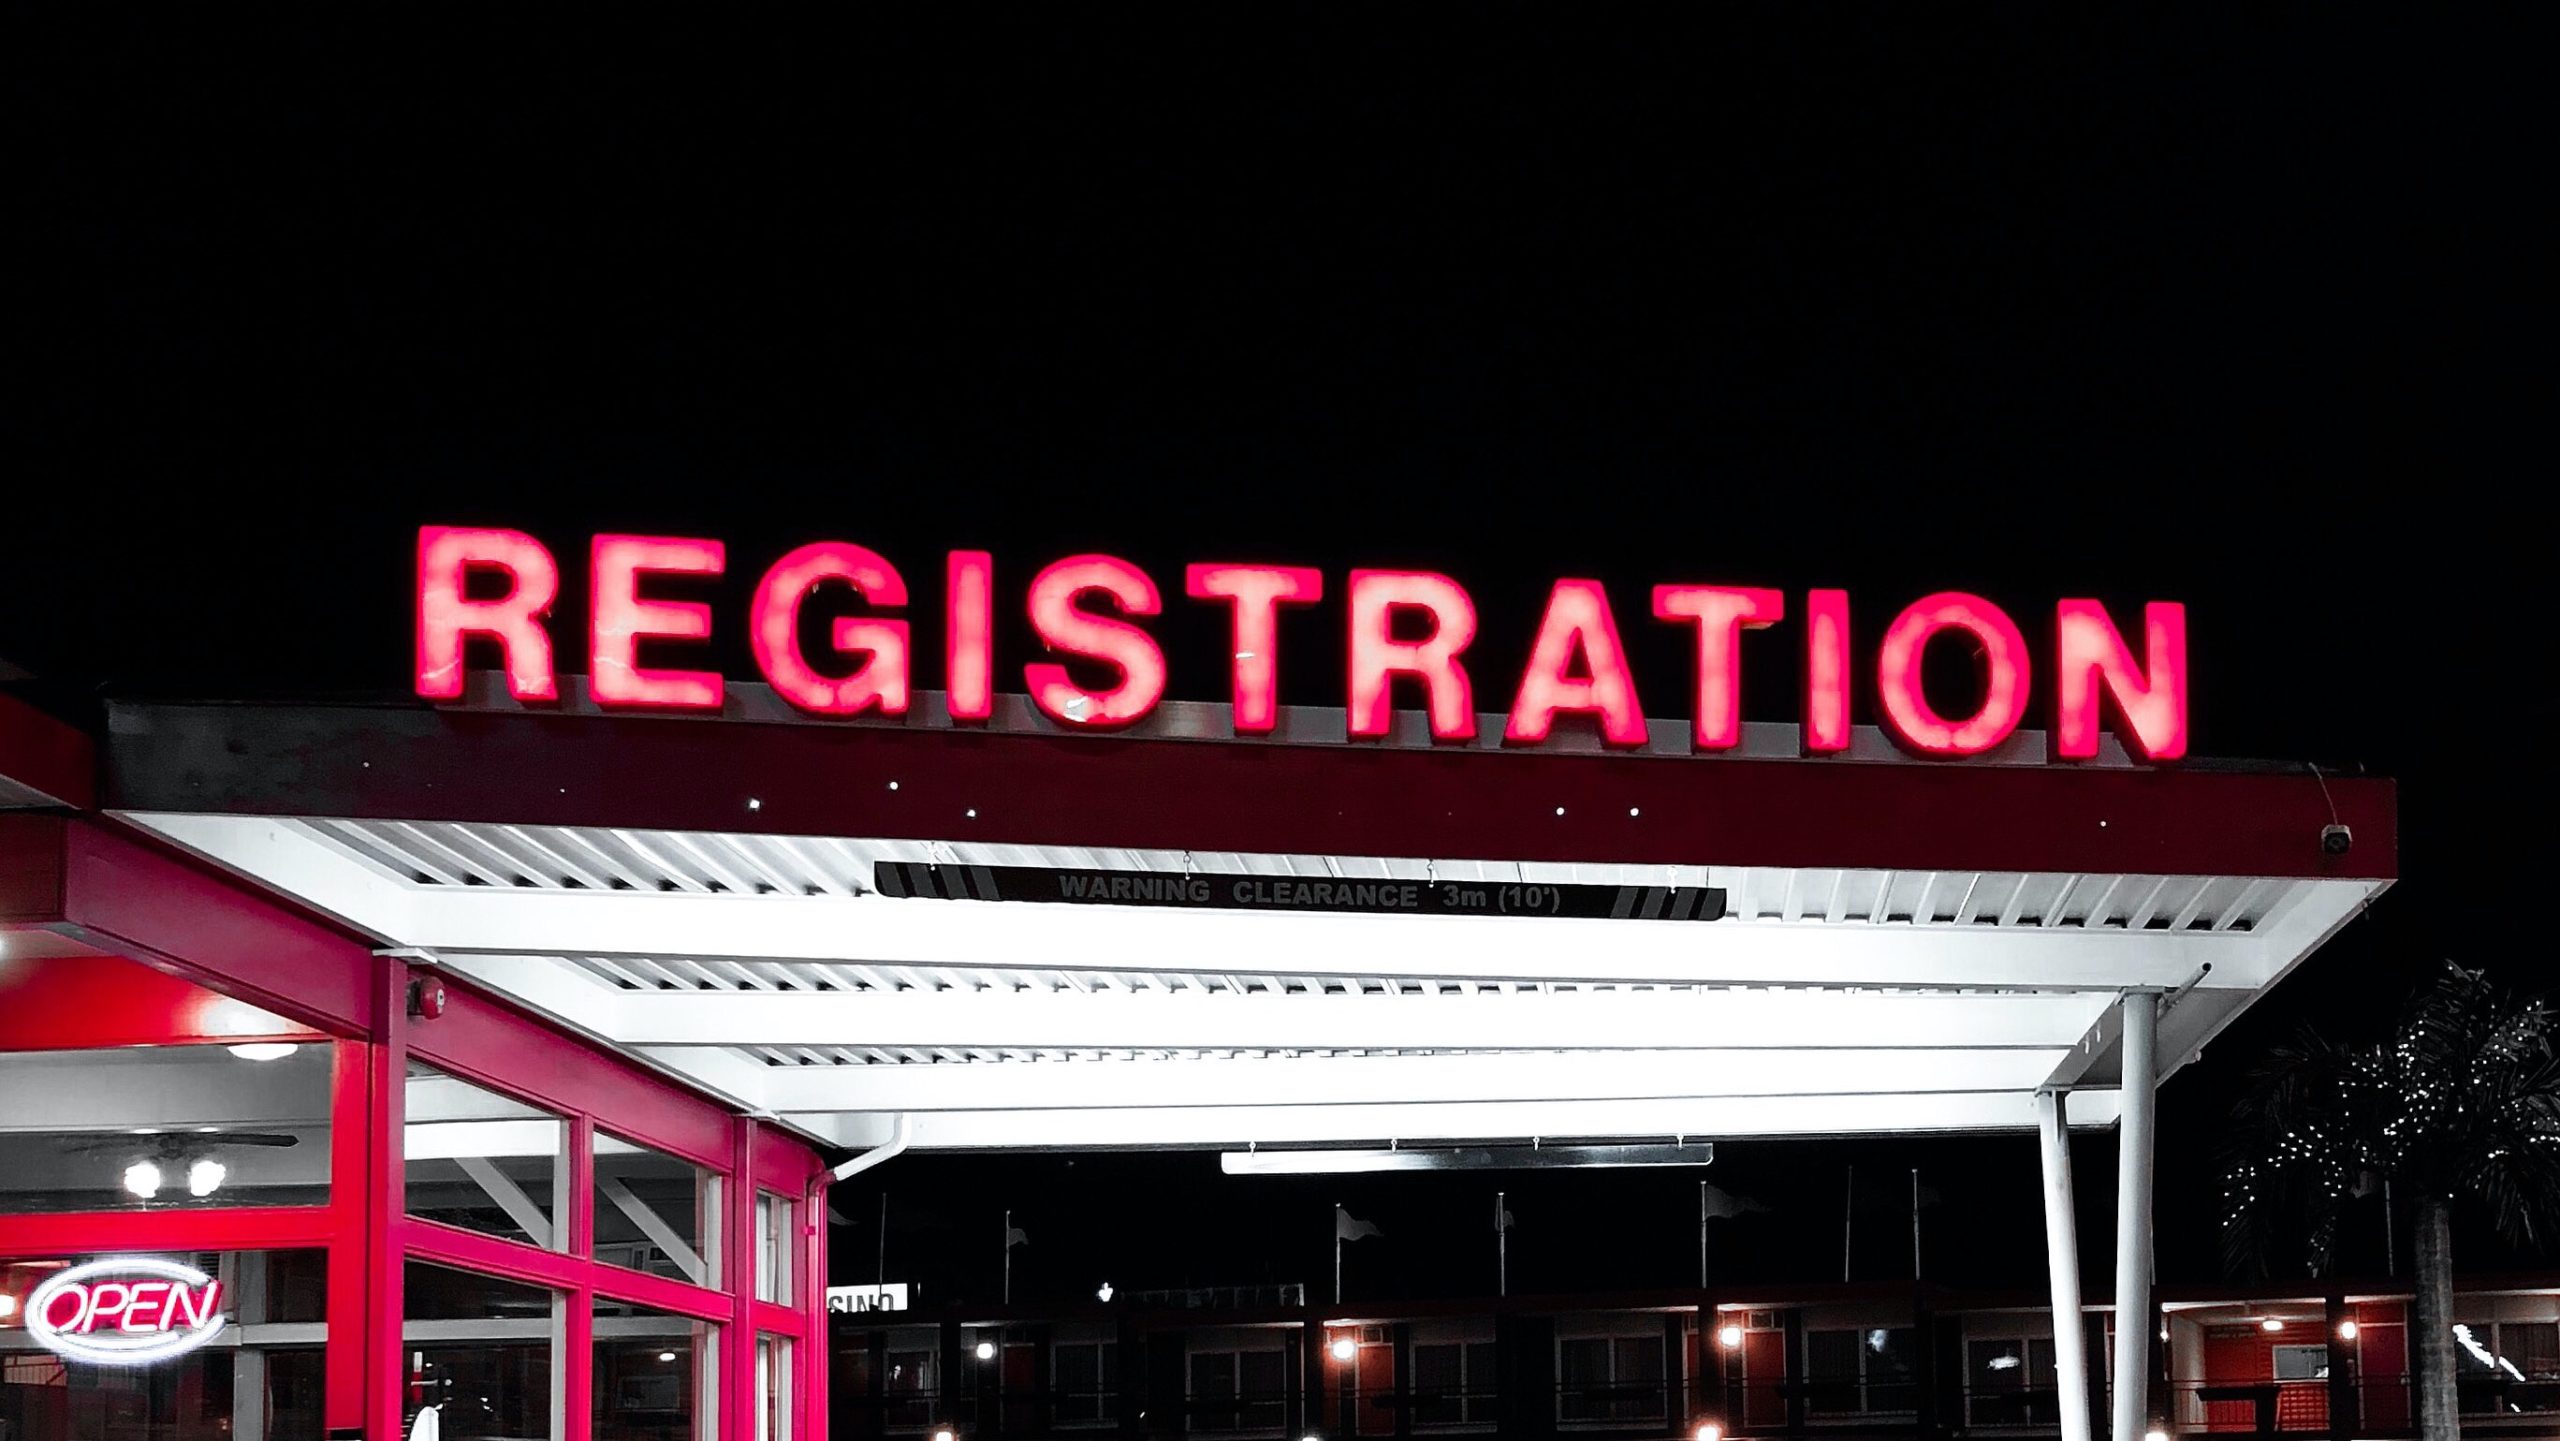 A neon sign reading "REGISTRATION" in front of a hotel at night.